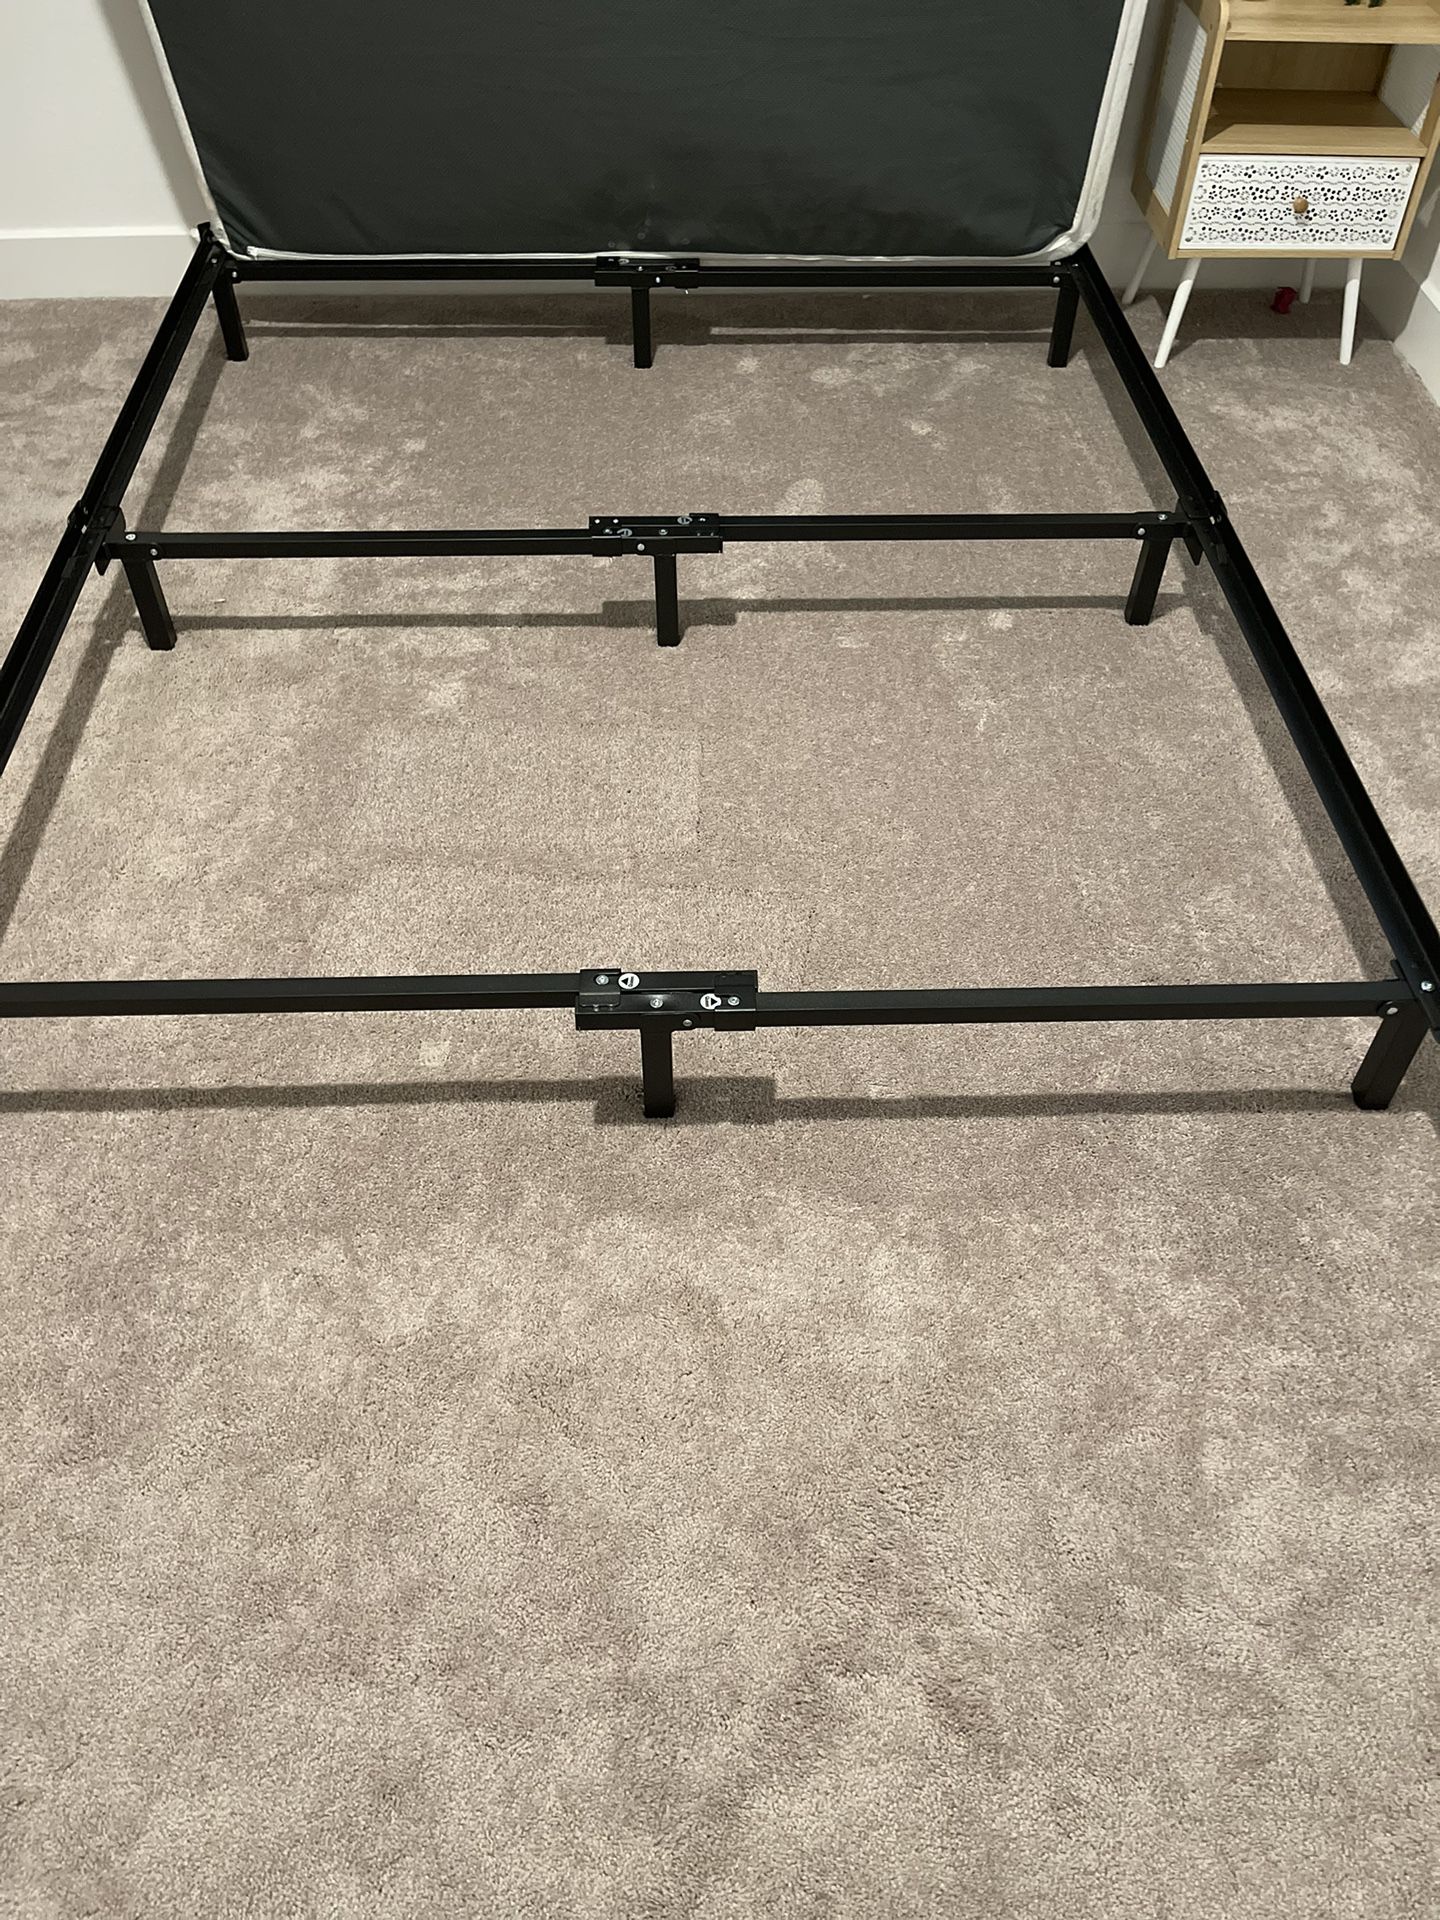 Queen Size Bed Frame And Box Spring For Sale